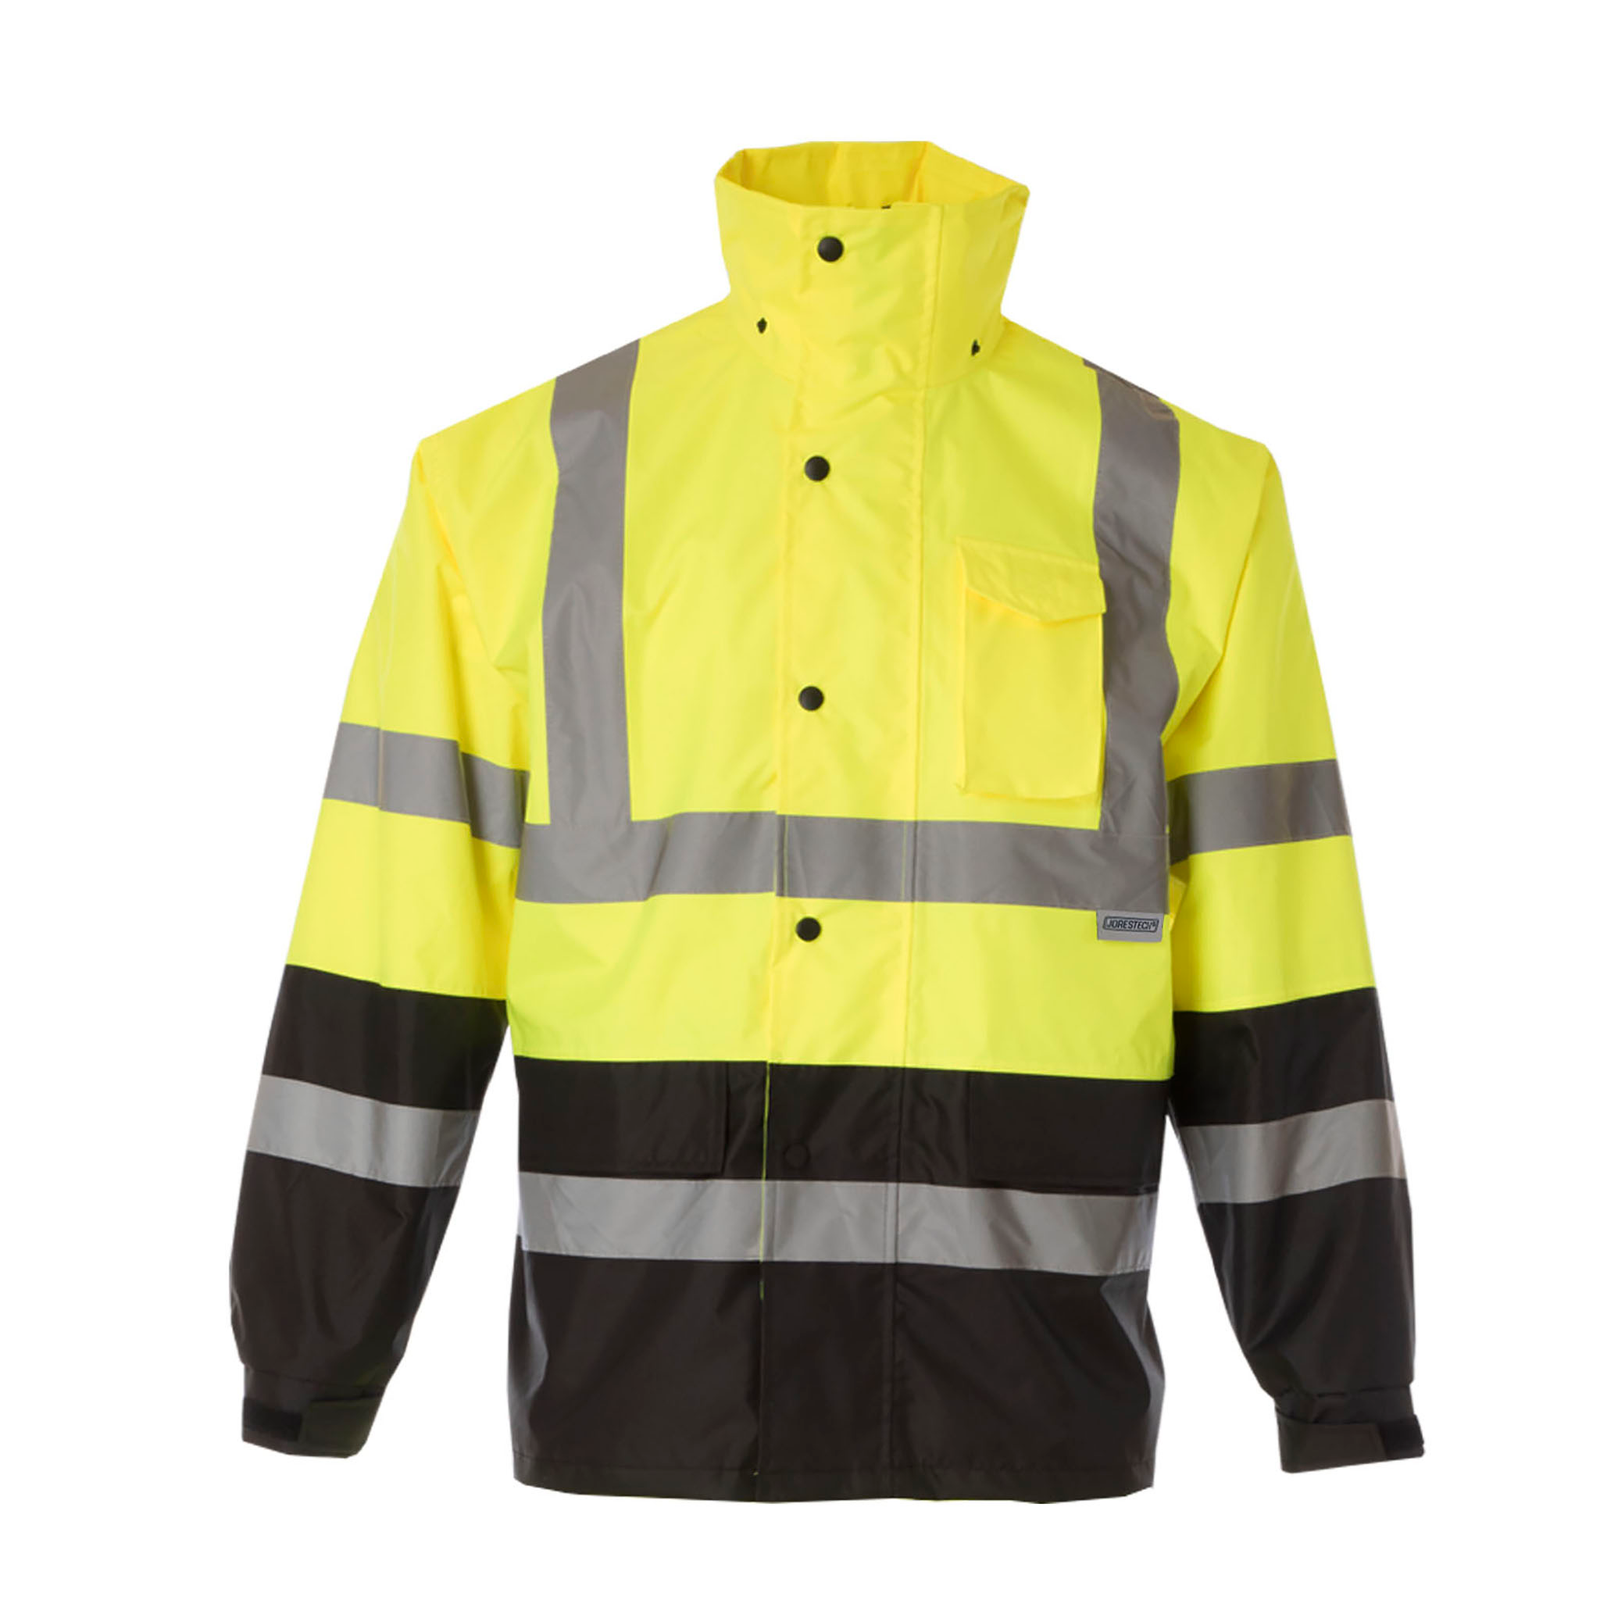 Front view of a JORESTECH High visibility yellow and black rain jacket with 2 inches reflective strips and hoodie